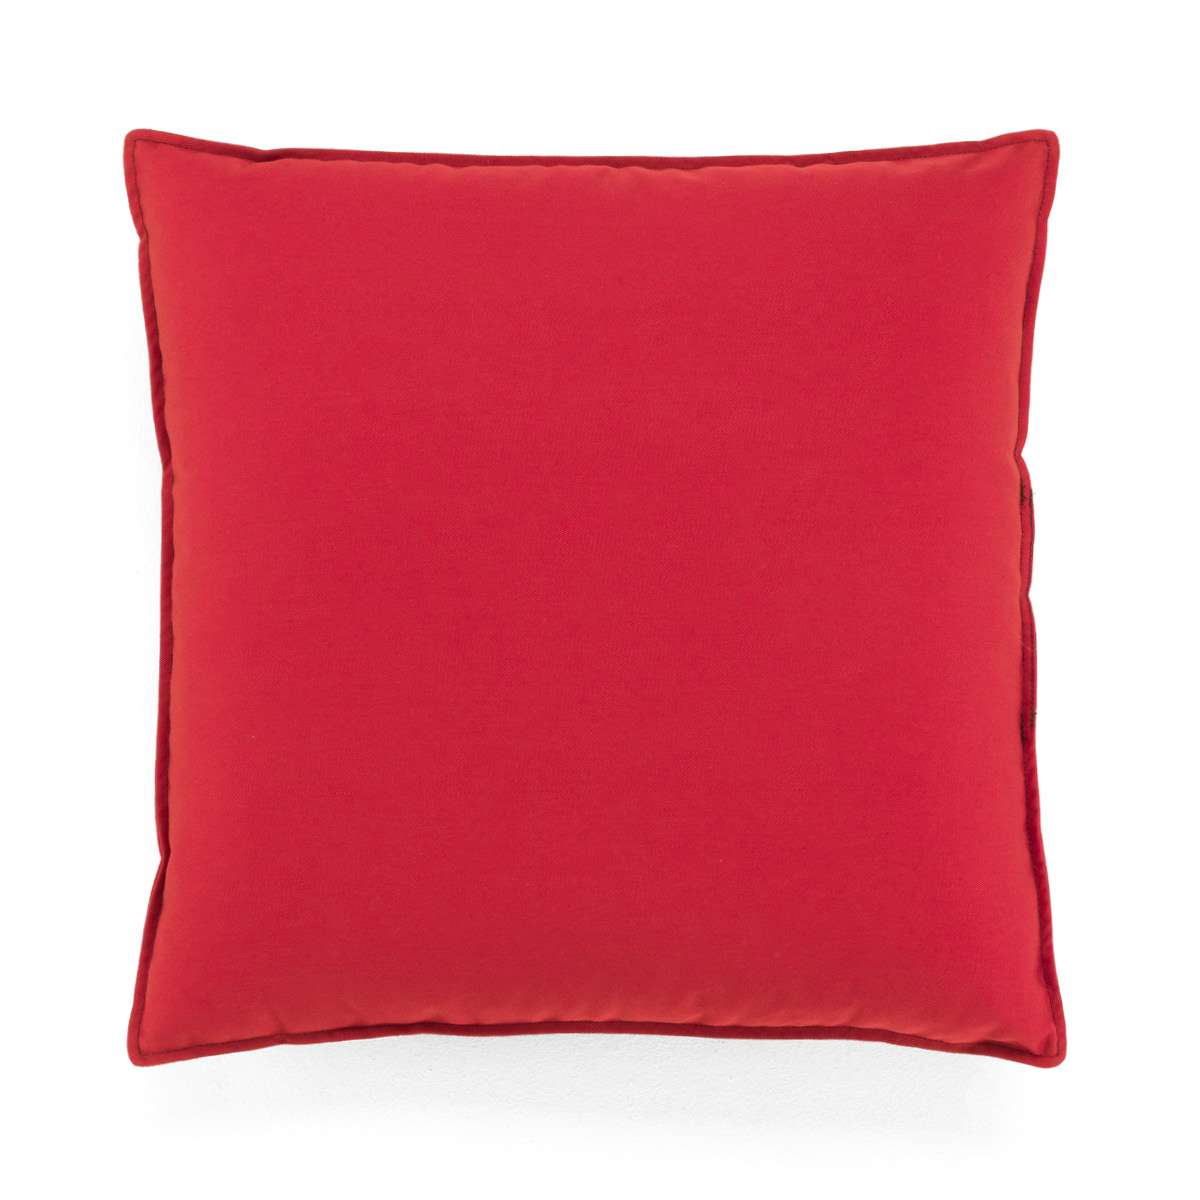 Cuscino relax 40x40 cm | Rosso | HAVE A SEAT Living